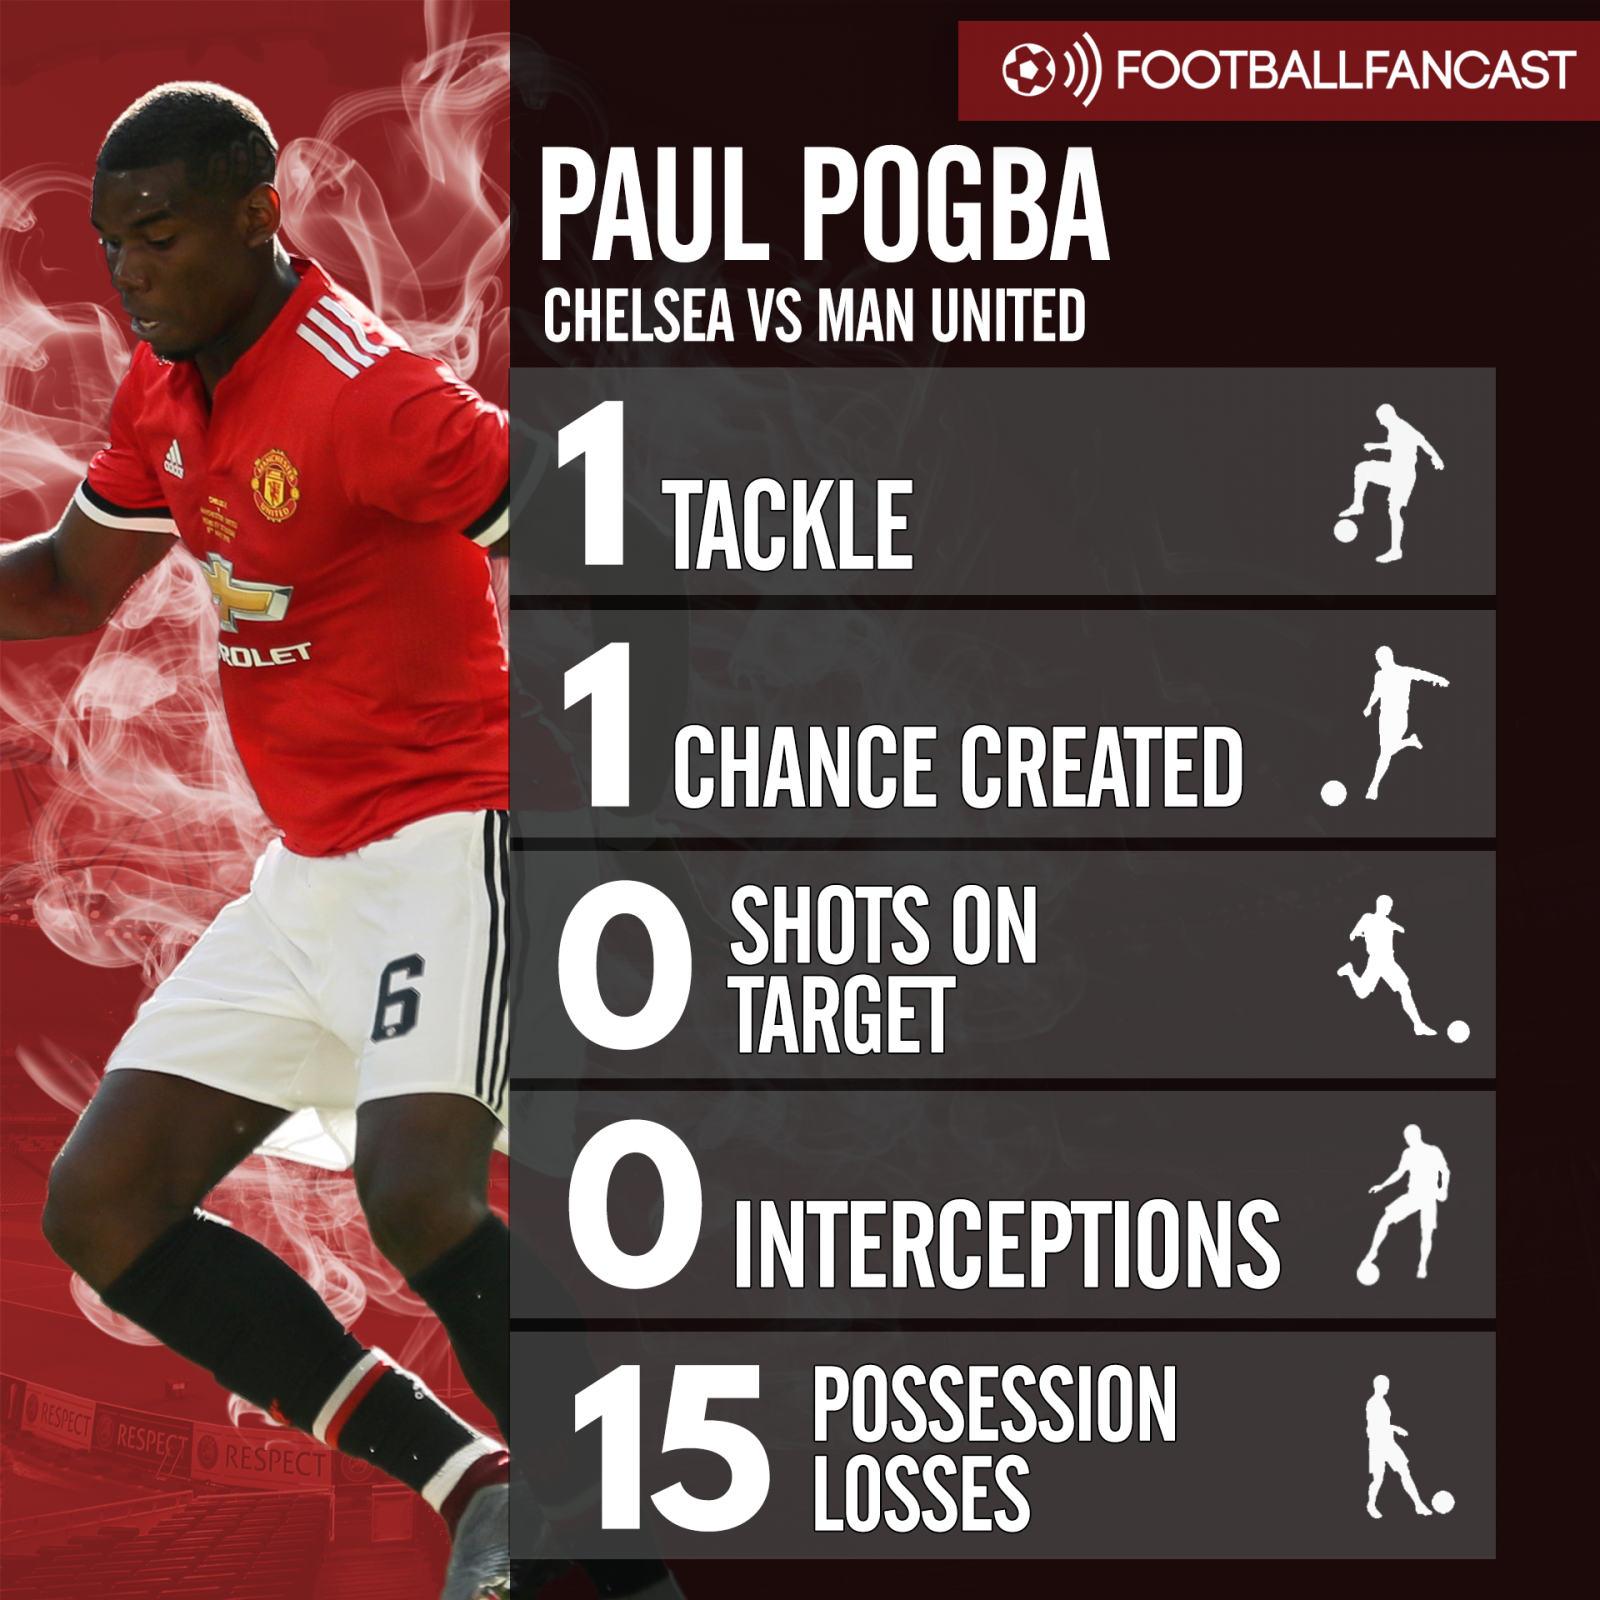 Paul Pogba's stats from Man United's 1-0 defeat to Chelsea